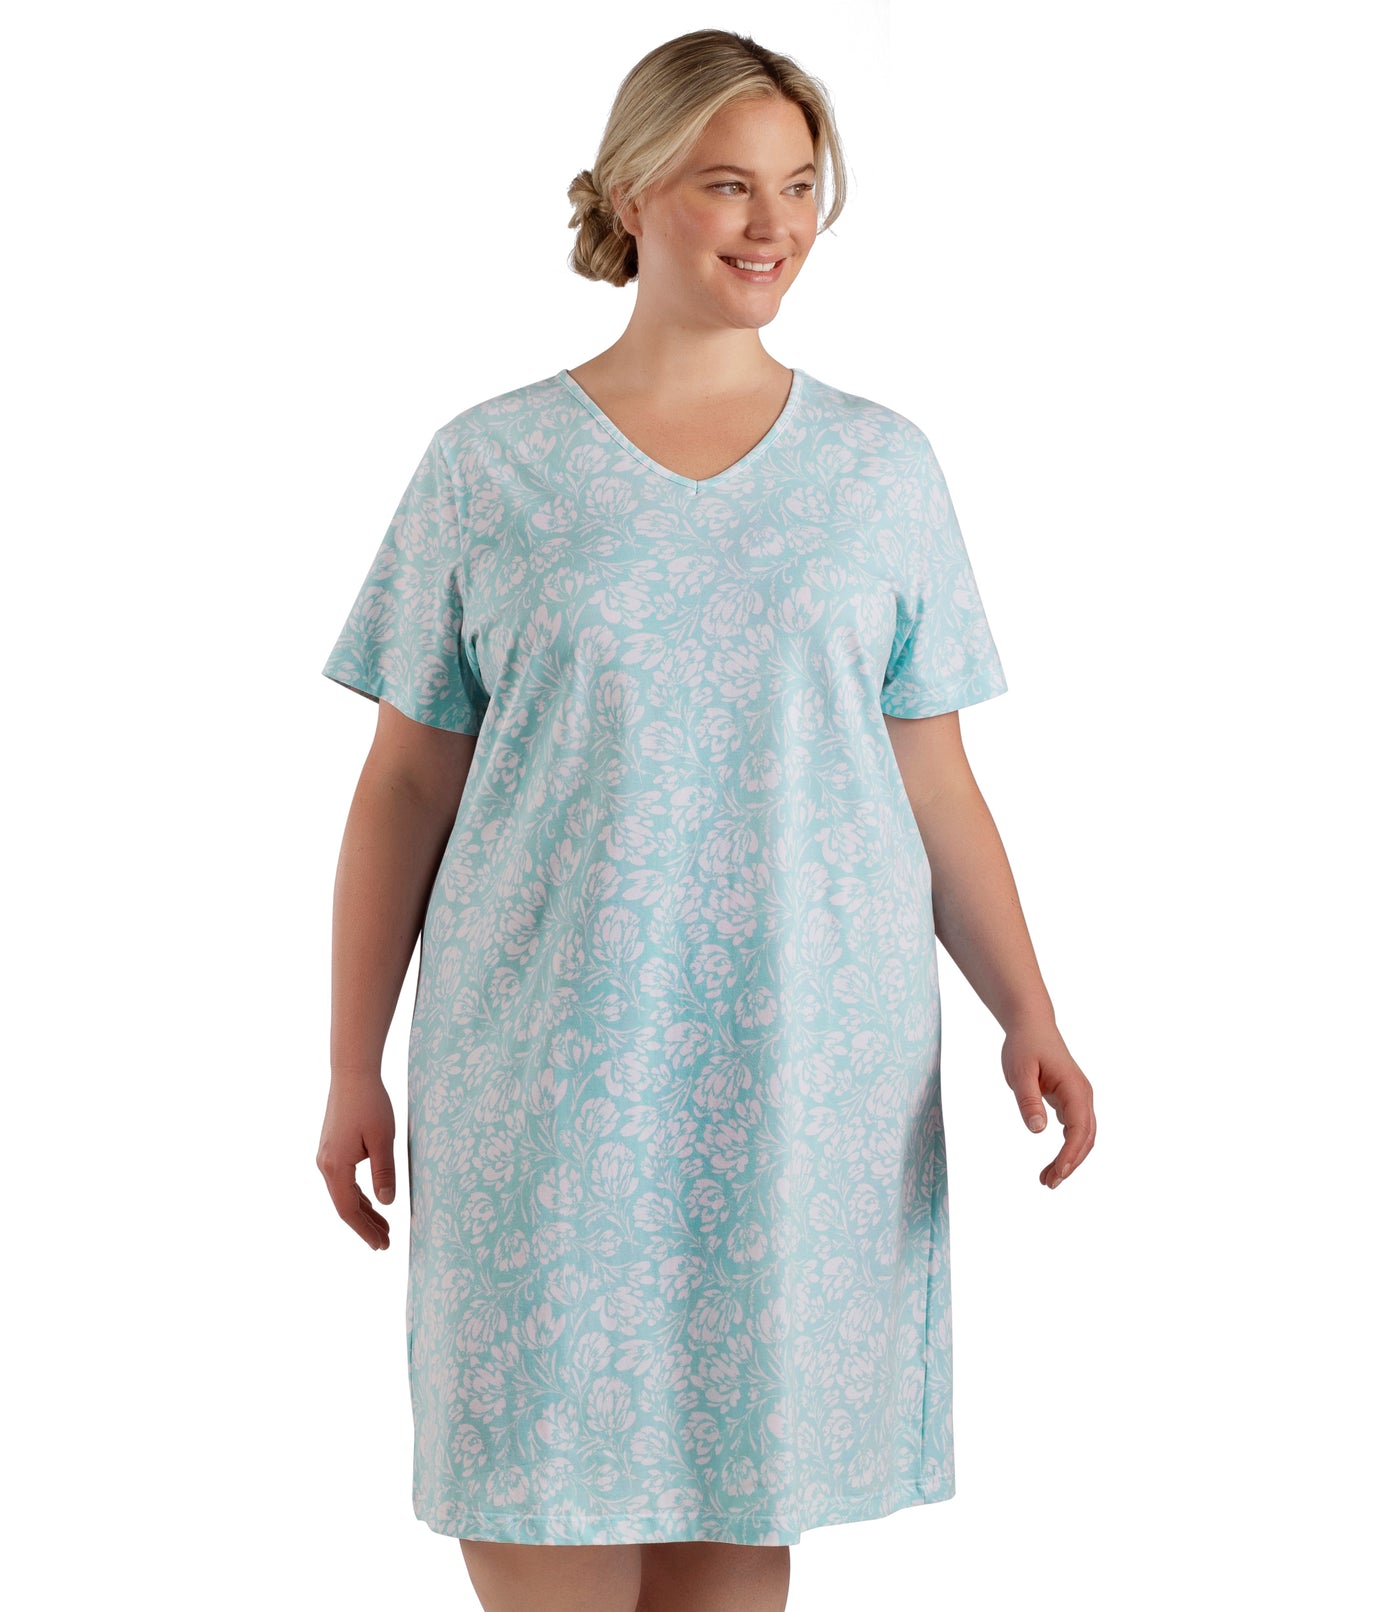 Plus size woman, facing front, wearing JunoActive plus size JunoBliss Sleep Dress in color Spring Blue Floral. The hem falls just below her knee.